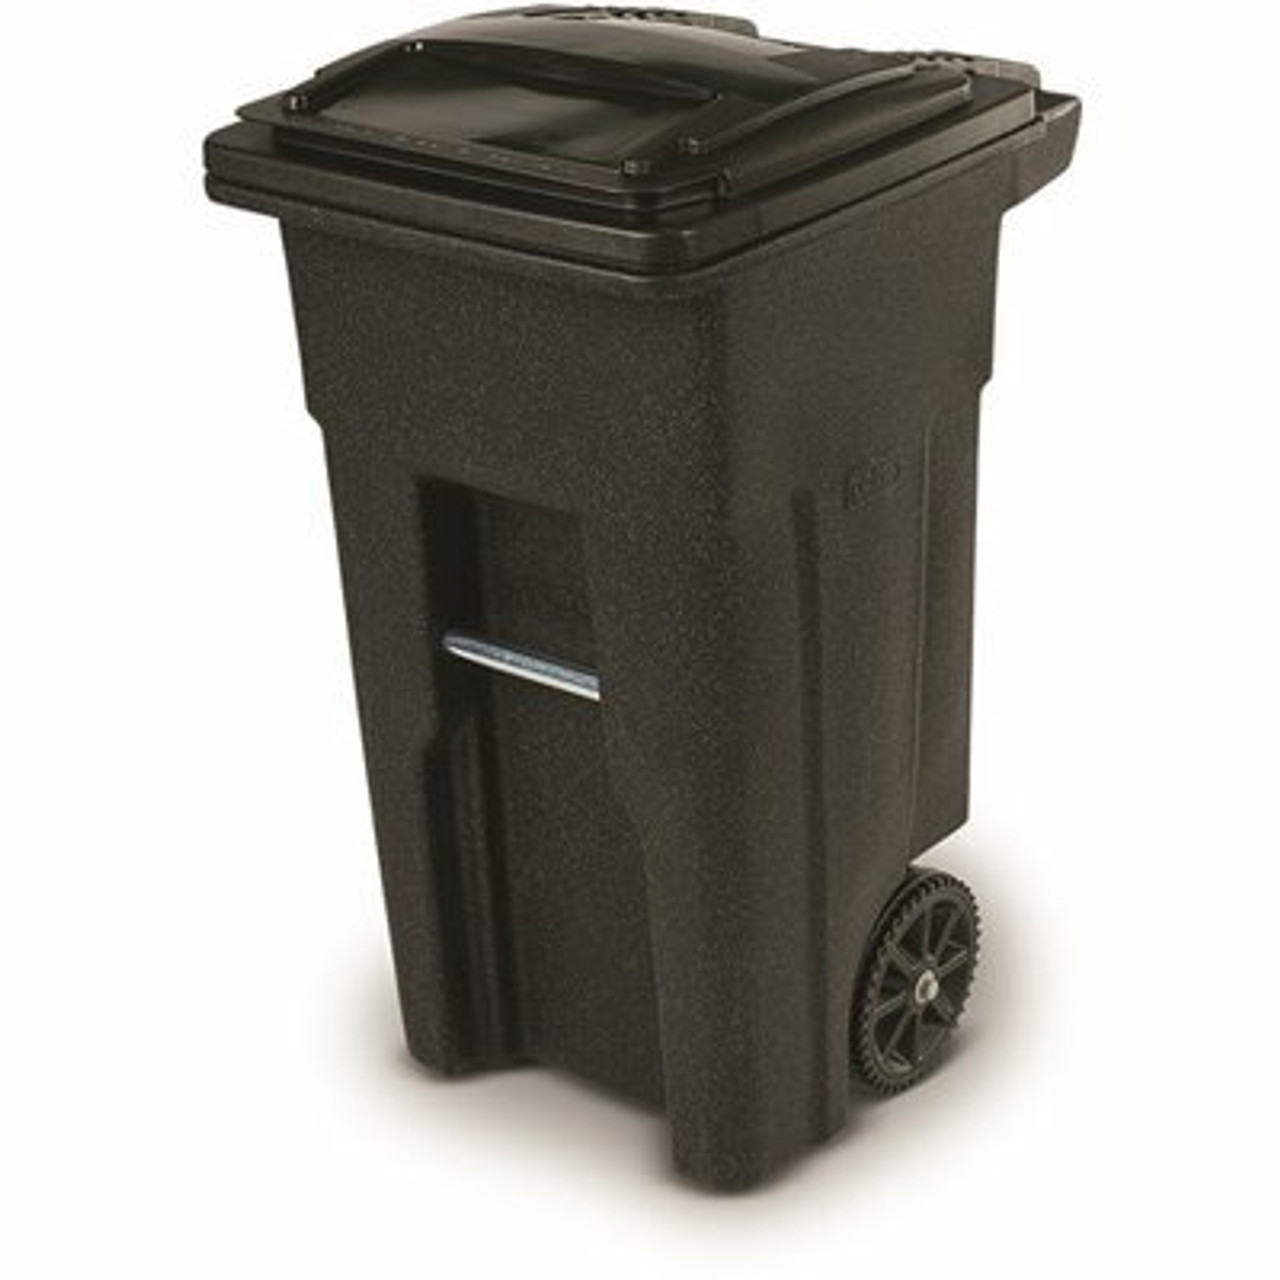 Toter 32 Gal. Blackstone Trash Can With Wheels And Attached Lid